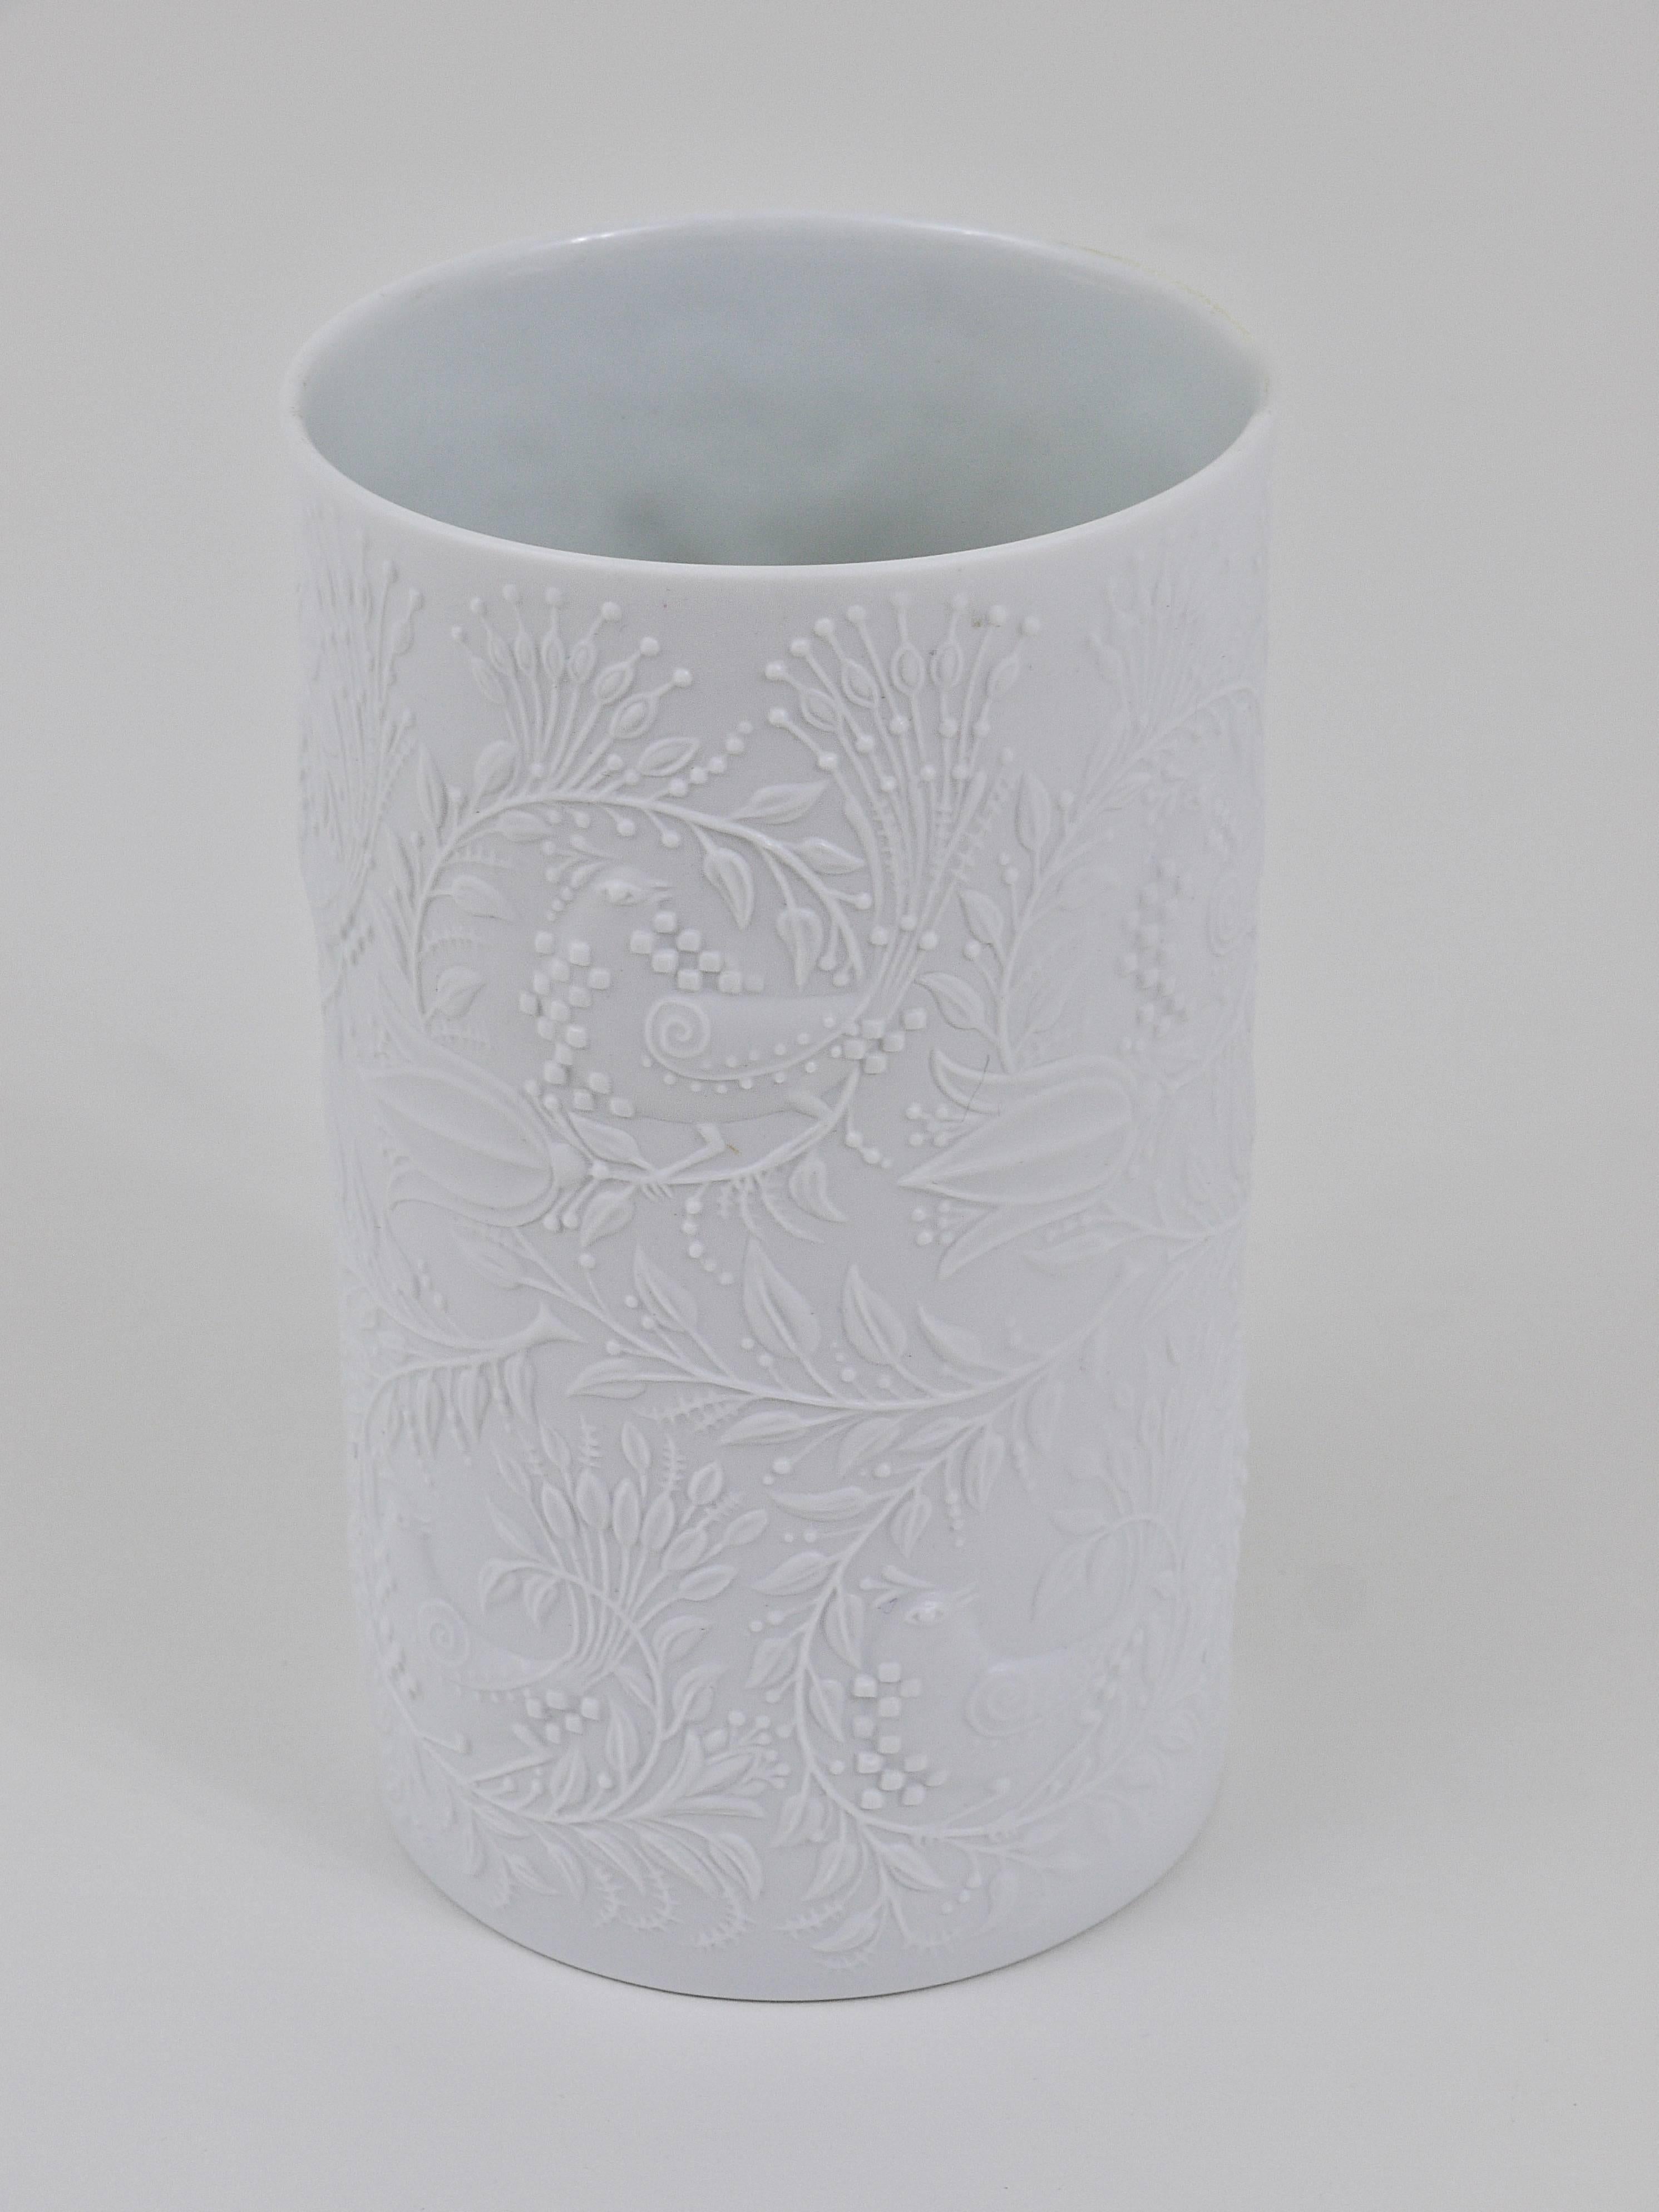 A beautiful white matte relief op-art porcelain vase from the 1960s, designed by Bjorn Wiinblad and executed by Rosenthal Studio-Line, Germany. In excellent condition.